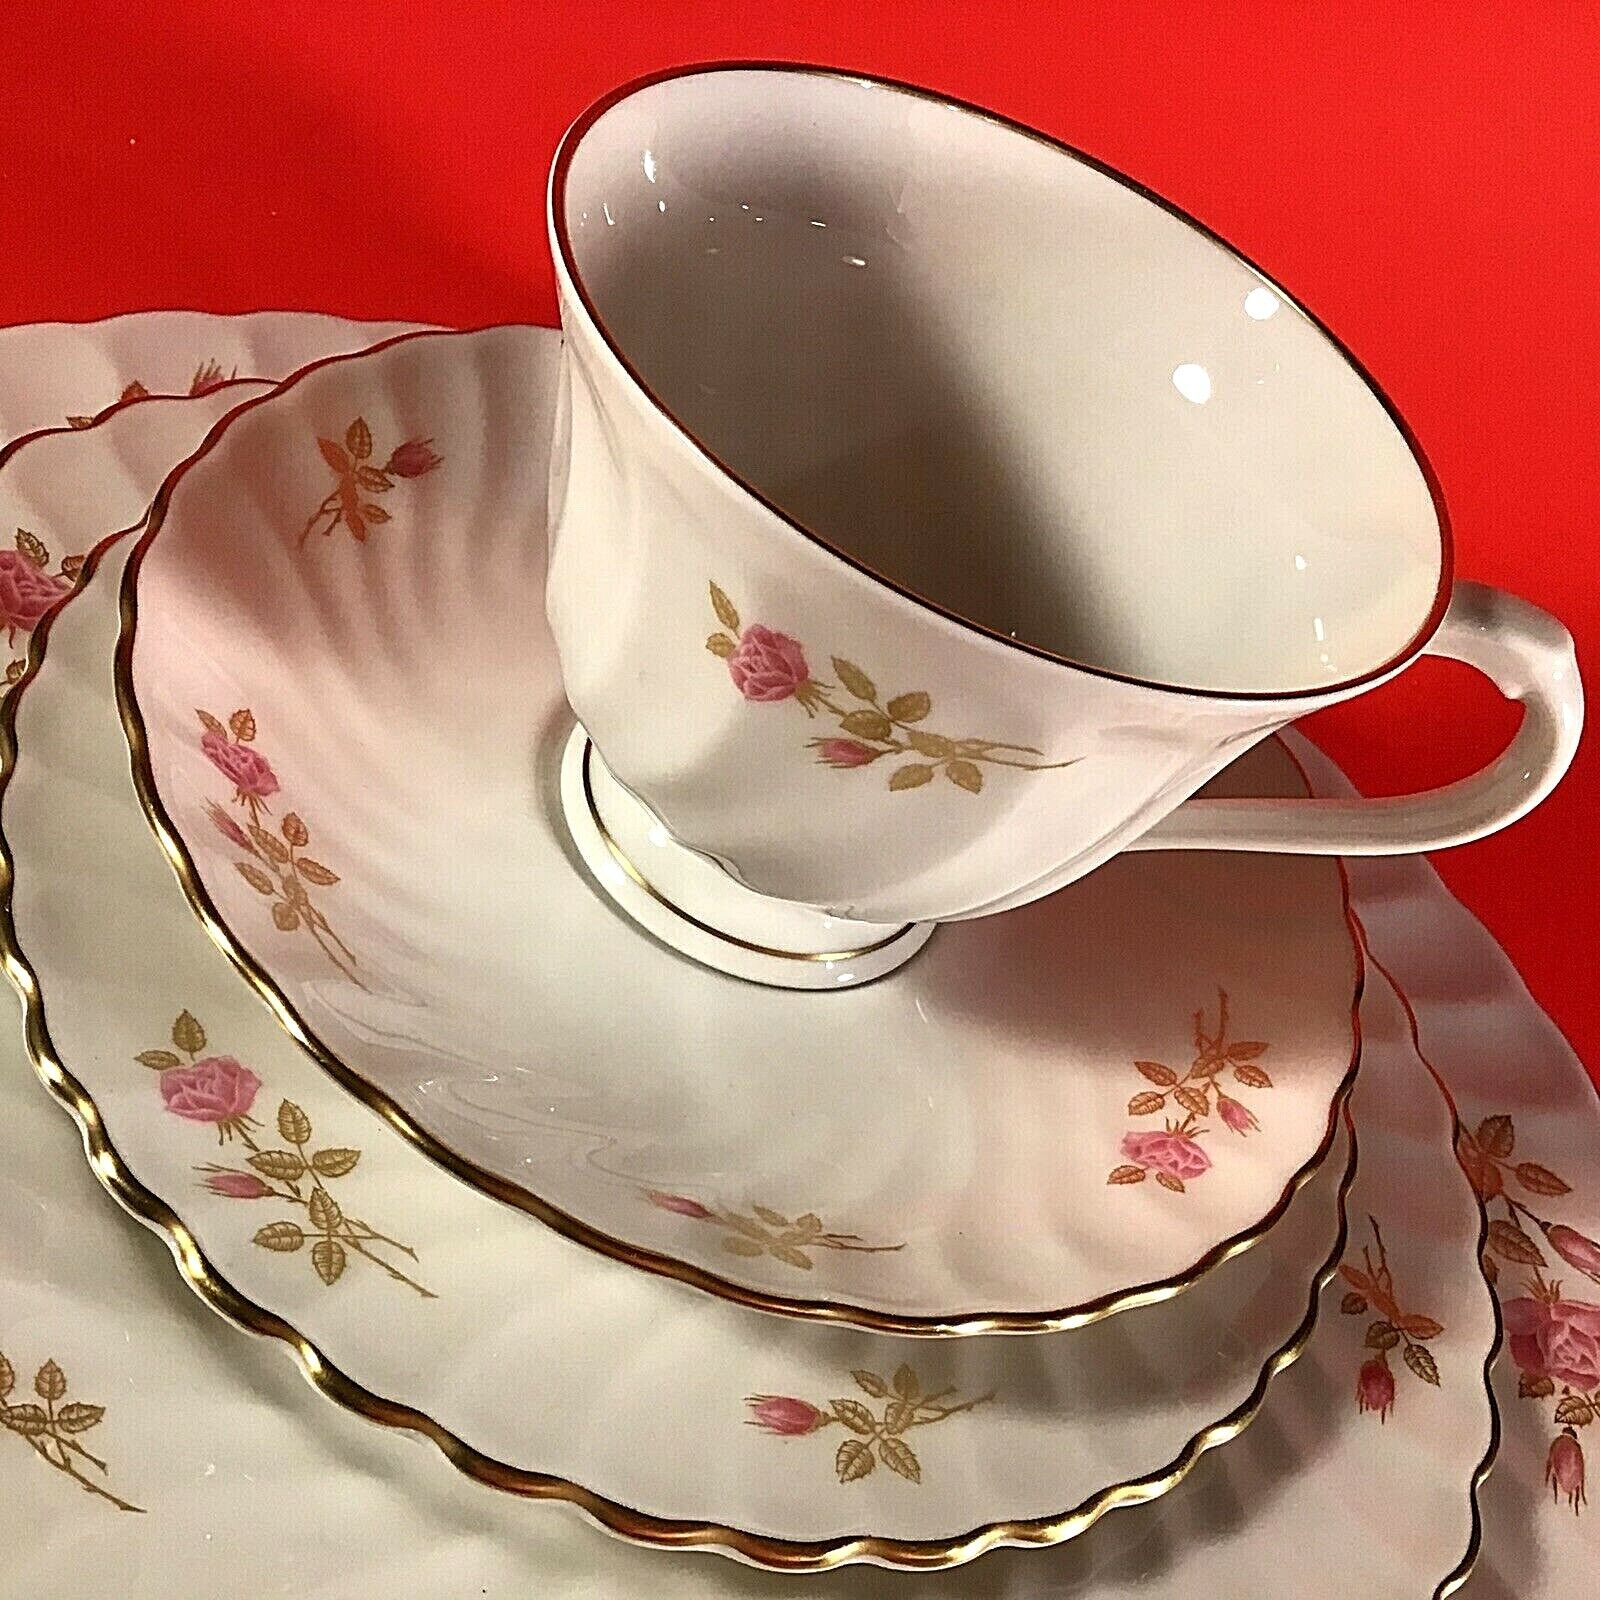 SYRACUSE CHINA COURTSHIP SILHOUETTE 5 PIECE PLACE SETTING PINK AND GOLD FLORAL syracuse china - фотография #3